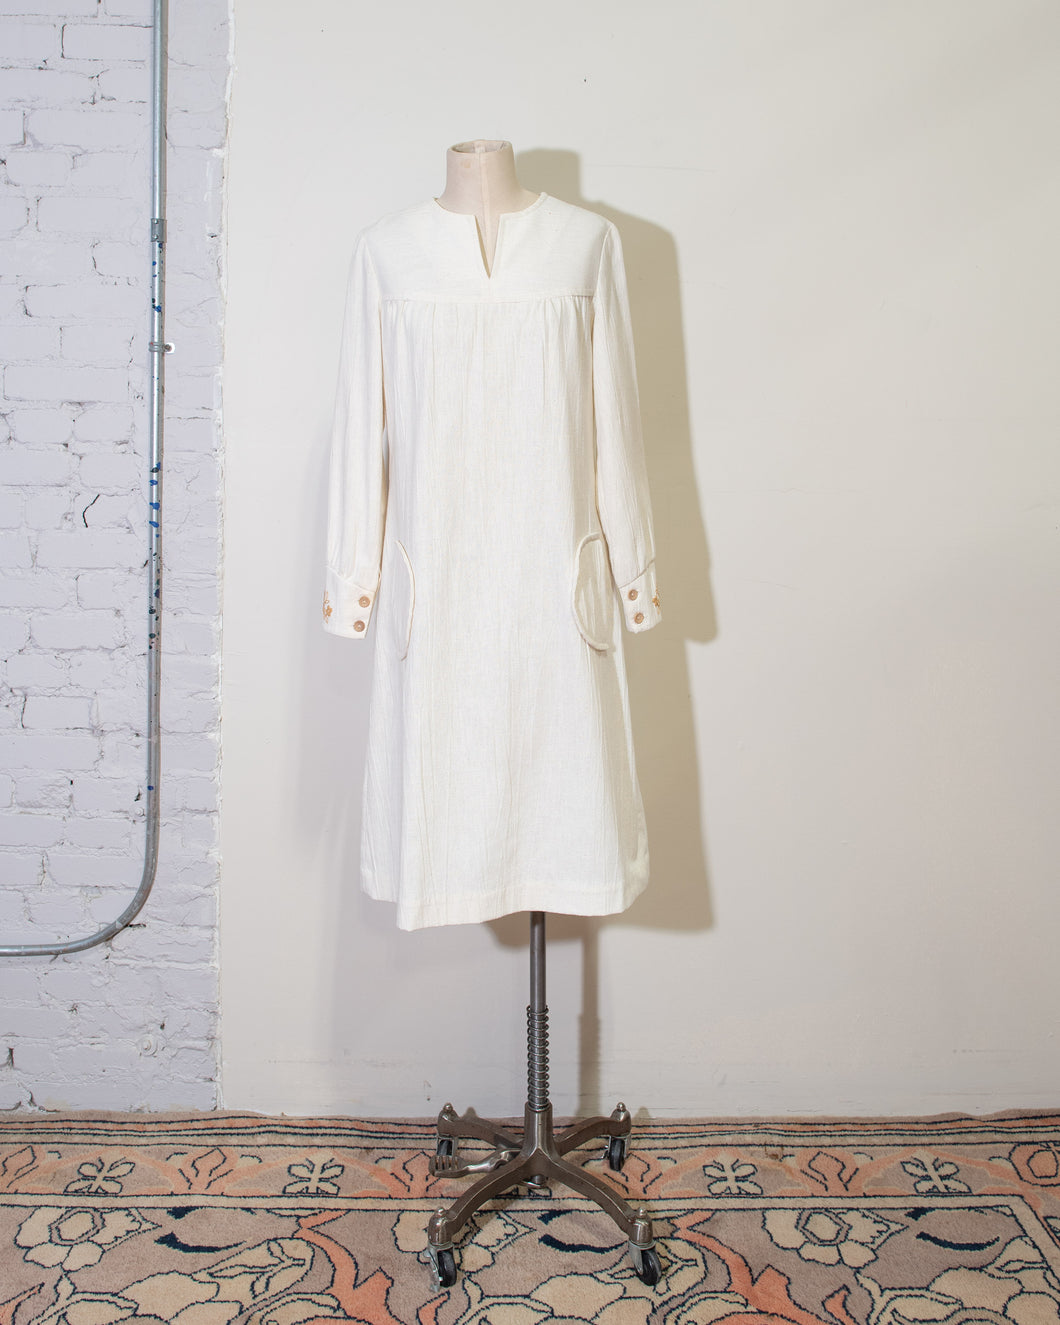 1970s Heavy Textured Cotton Neiman Marcus Long Sleeve Dress with Embroidered Cuffs